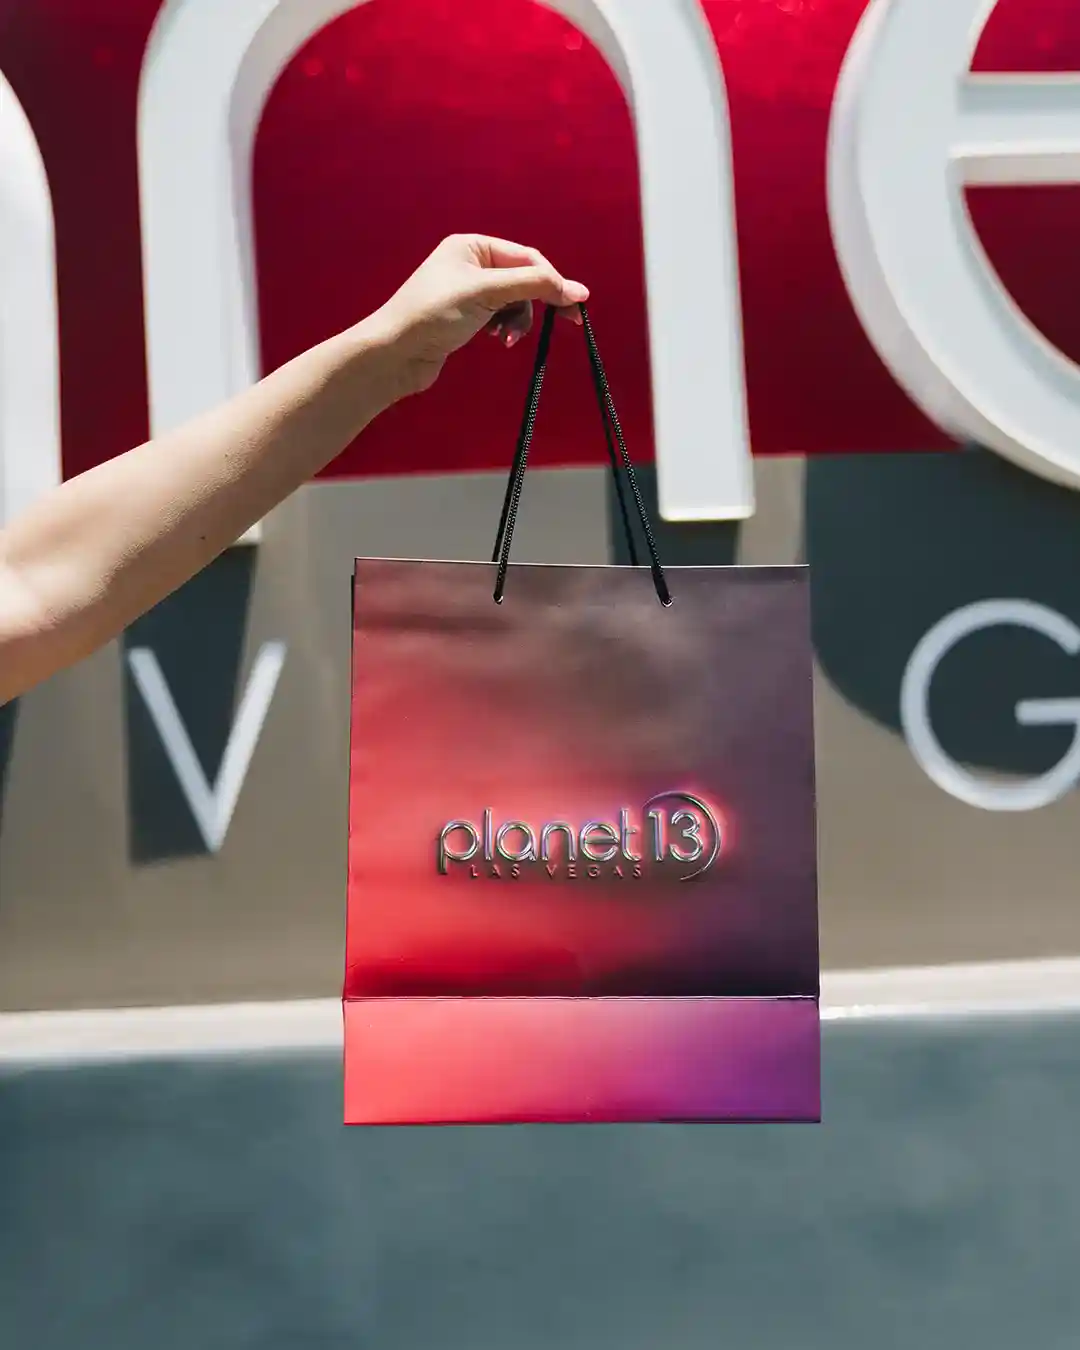 Hand holding a Planet 13 bag